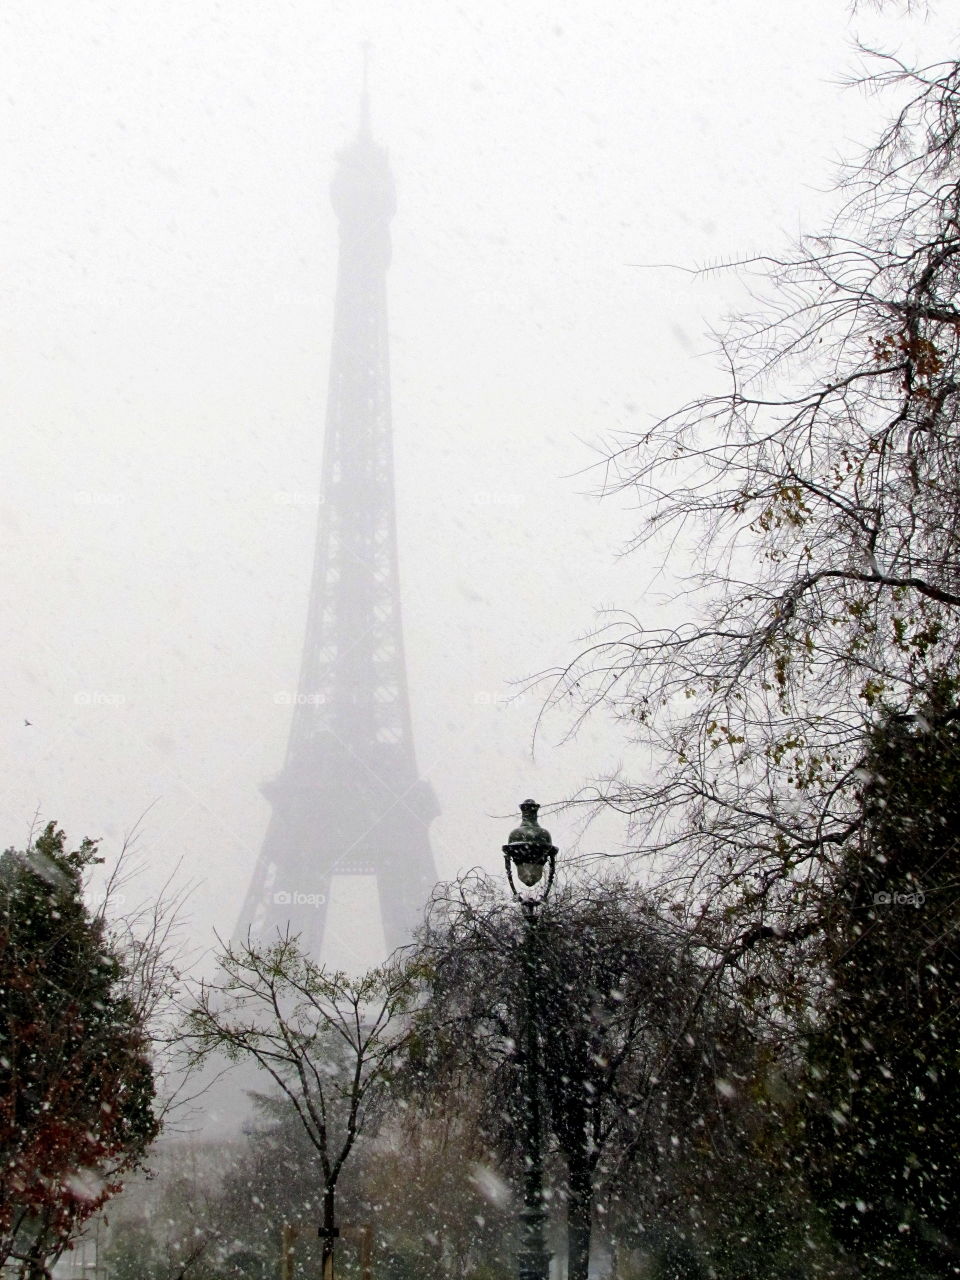 Eiffel tower and trees in Paris under the snow